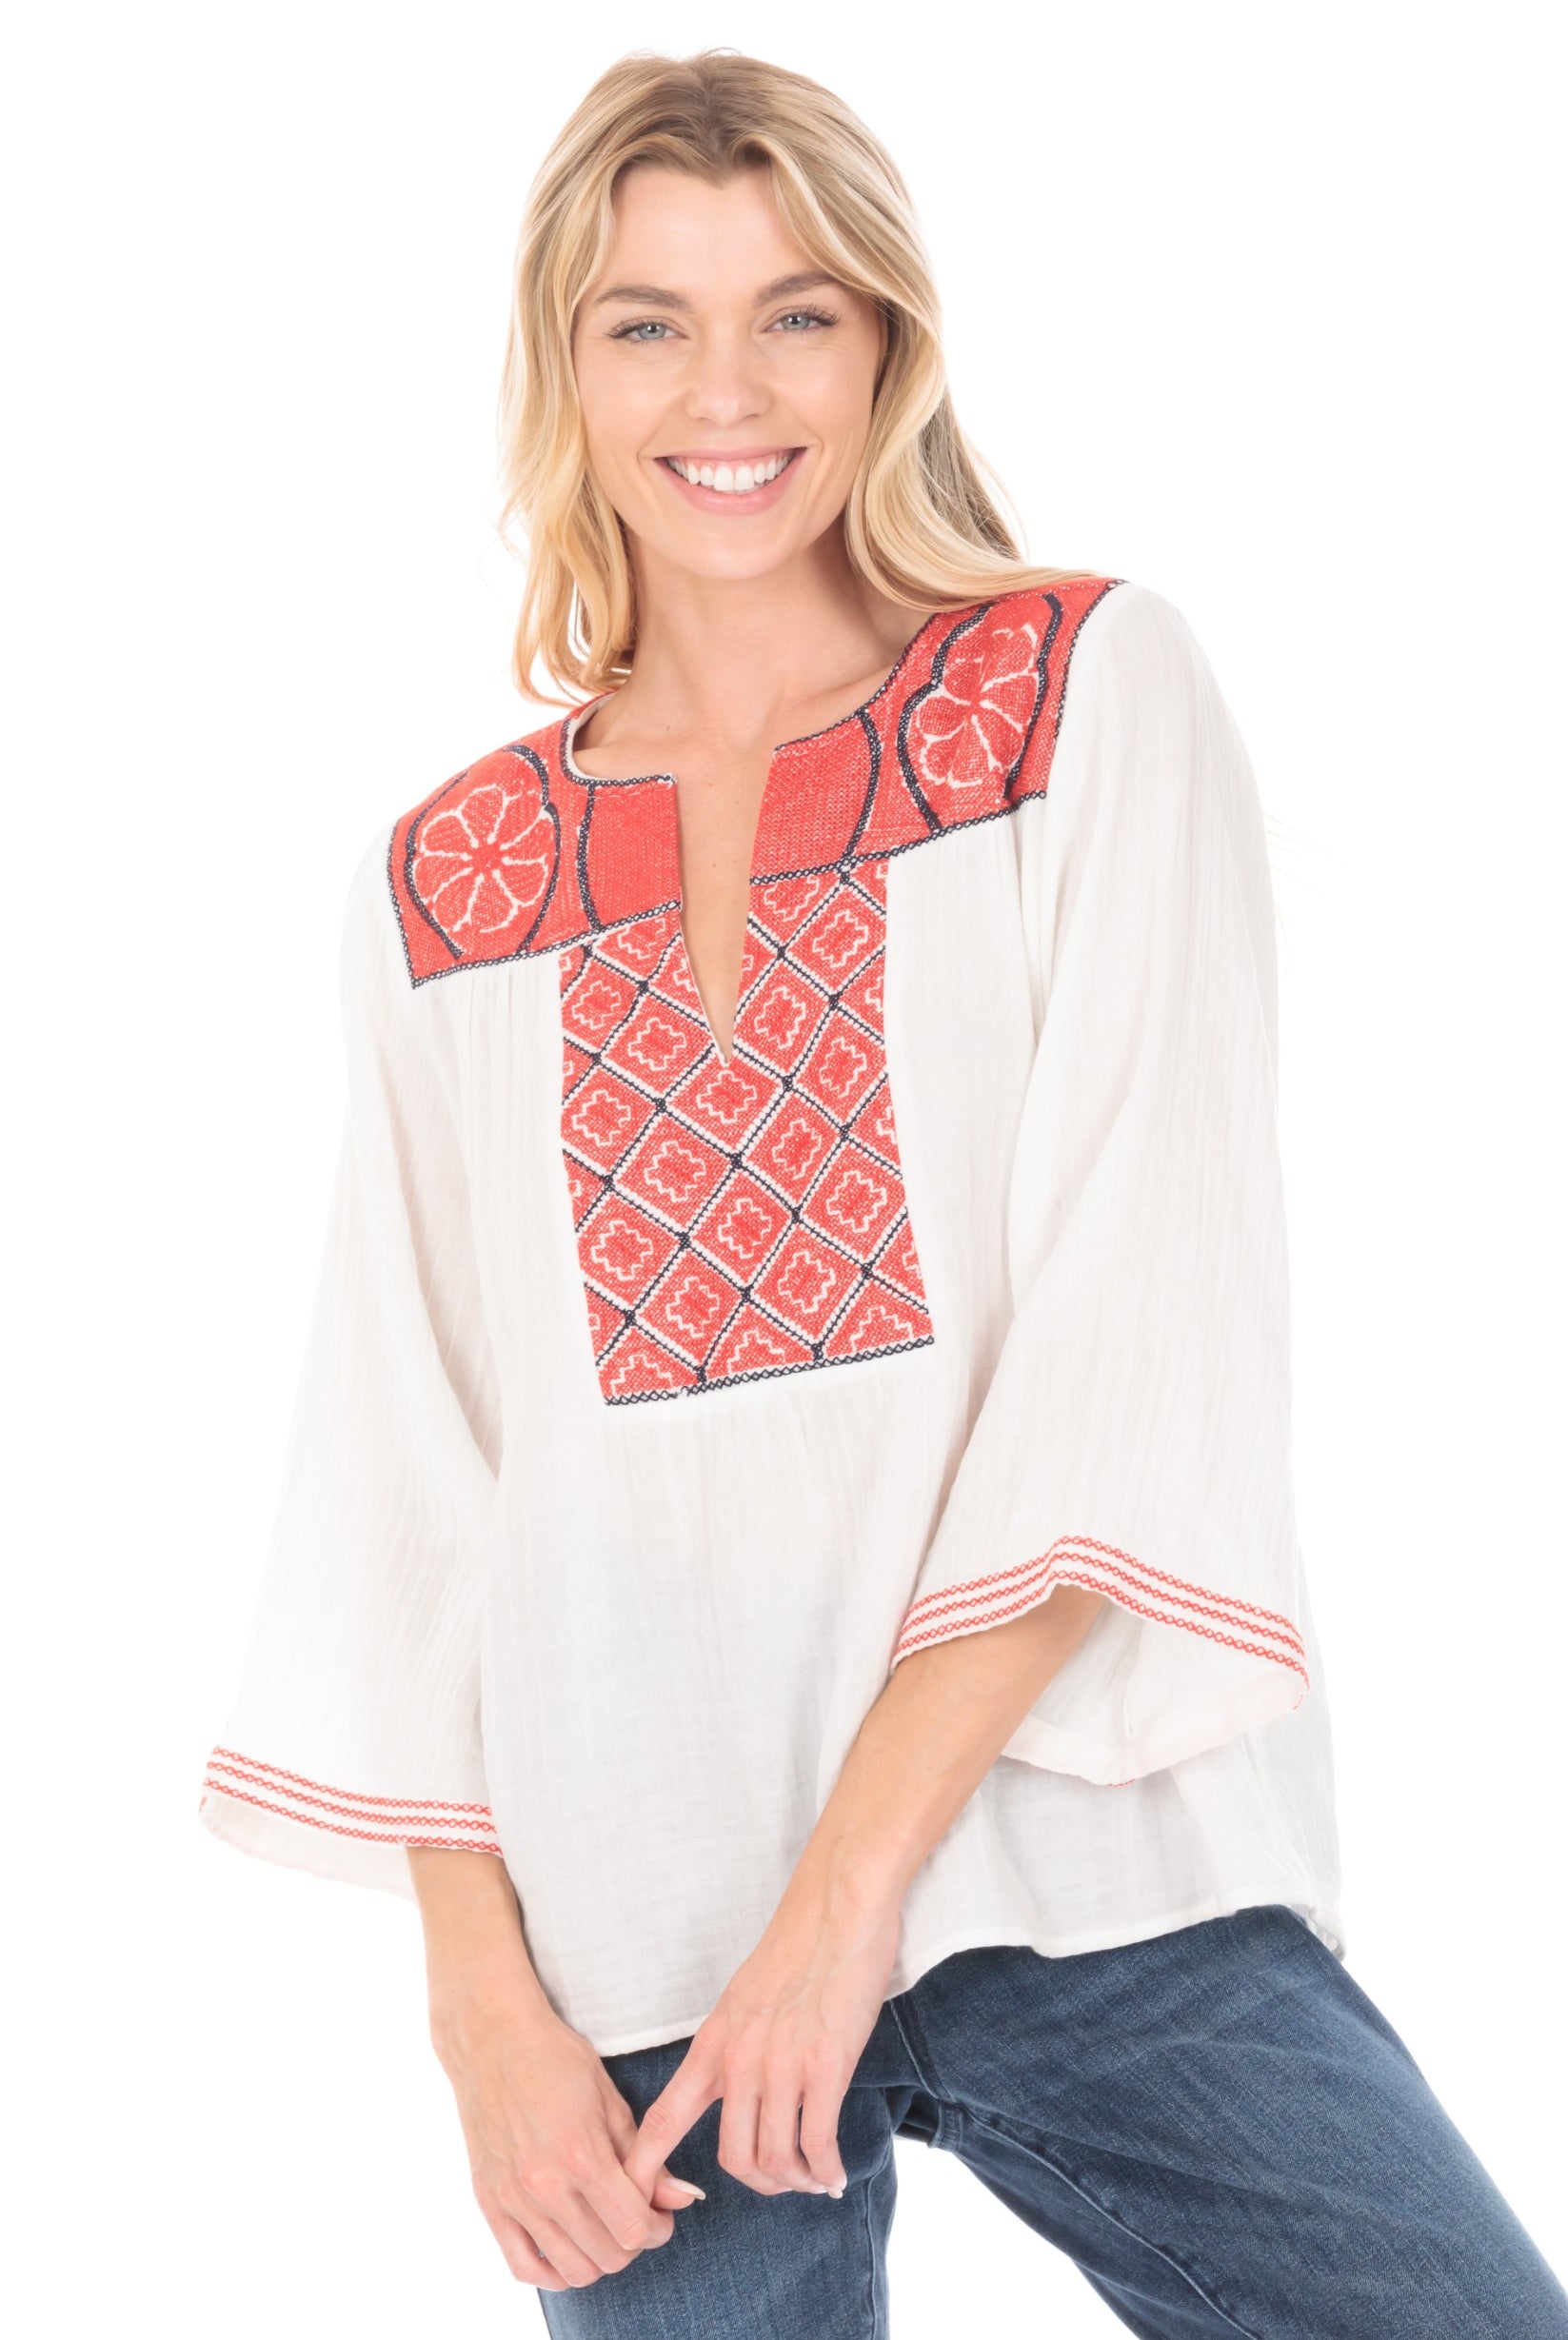 Pull/Over With Red Medallion Embroidery Front APNY